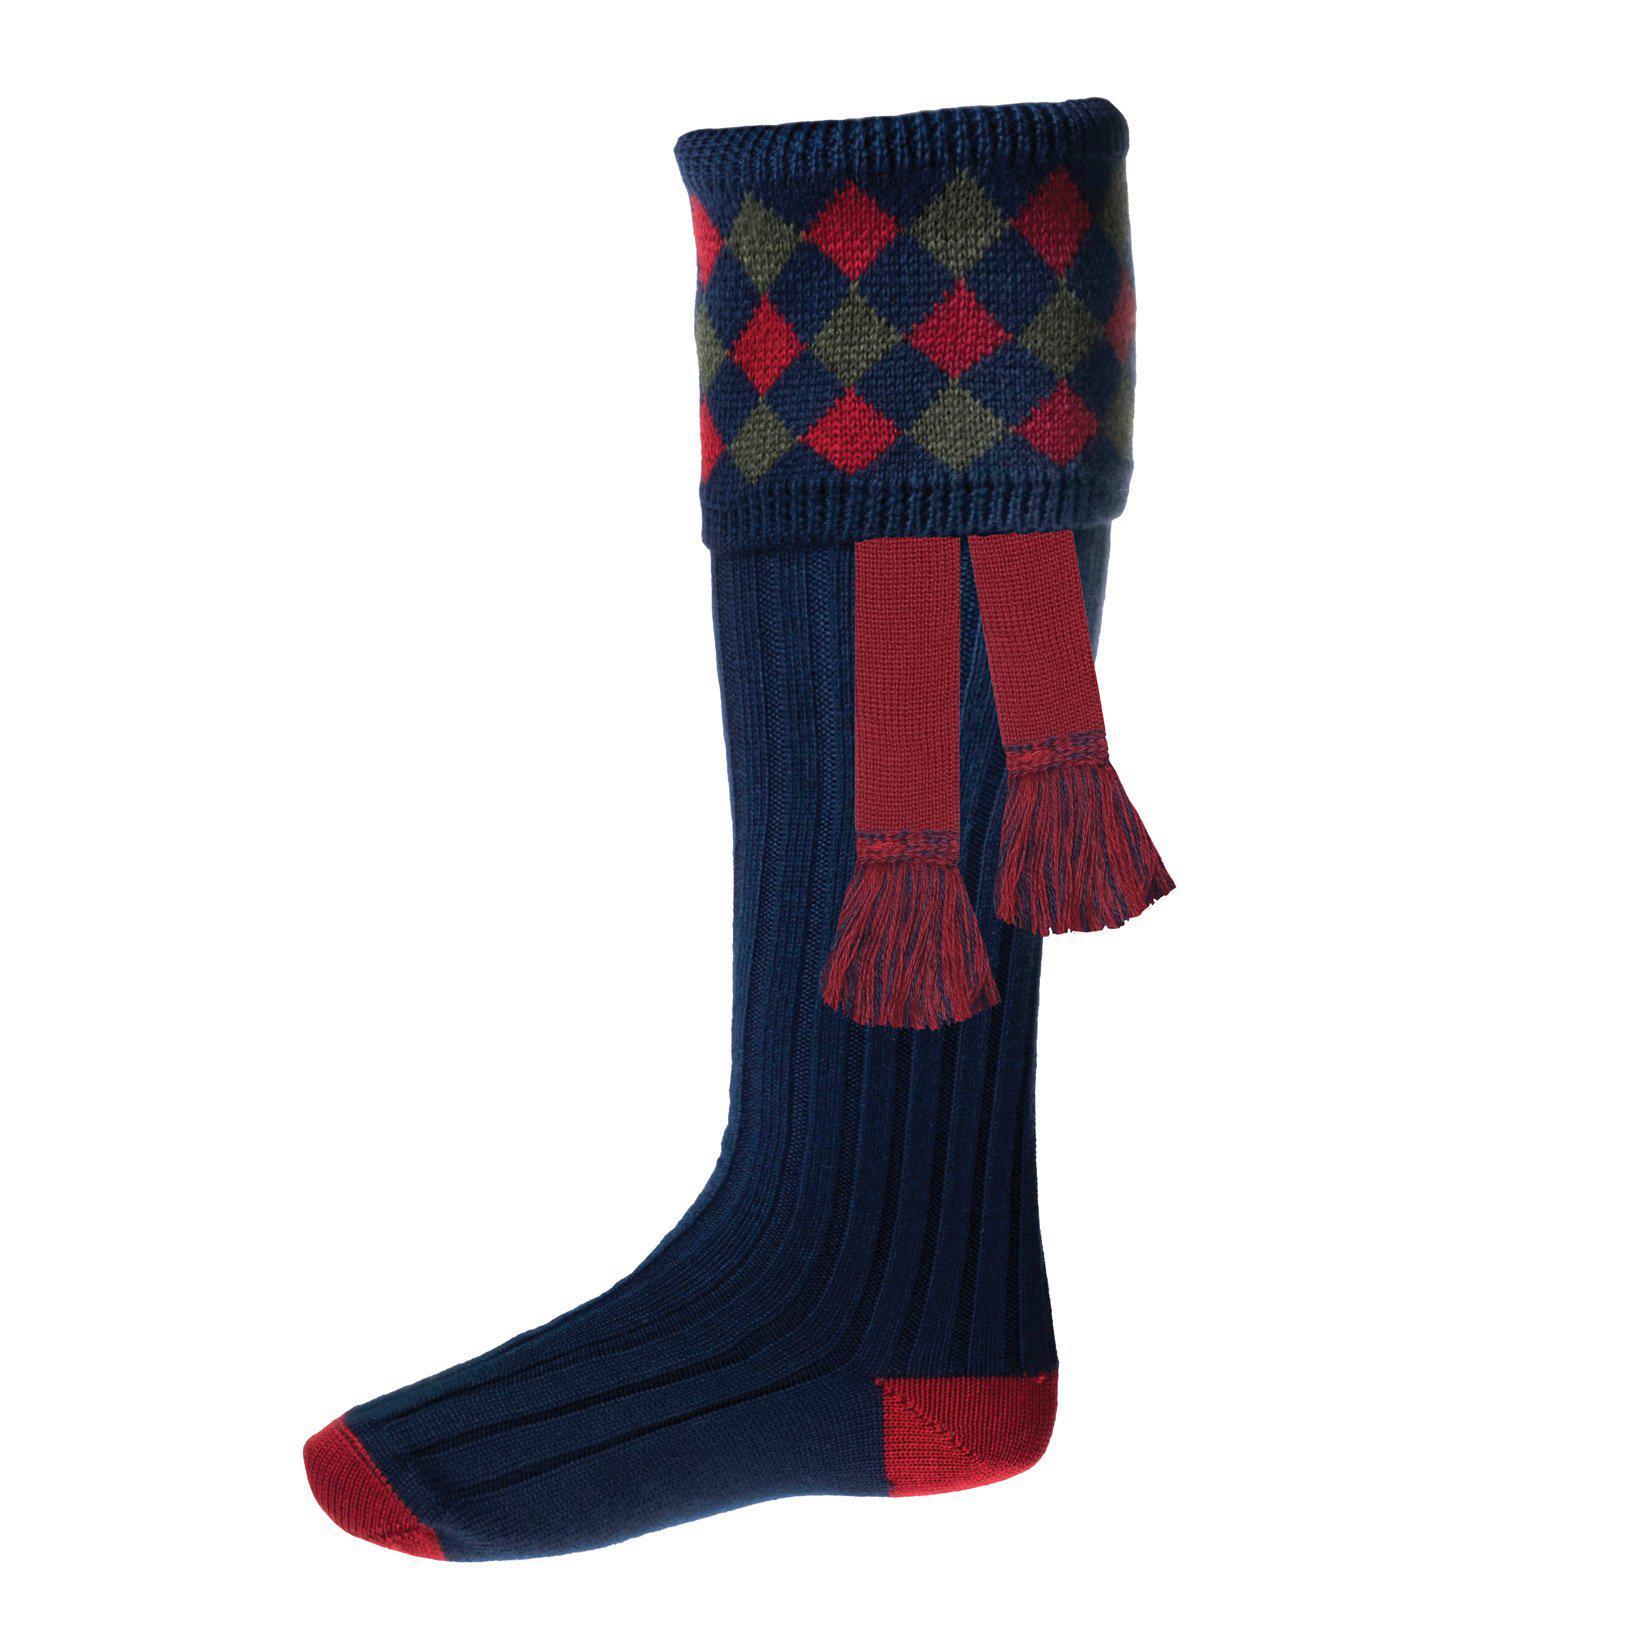 Chequers Socks with Garter Ties-House of Cheviot-Conrad Hasselbach Shoes & Garment